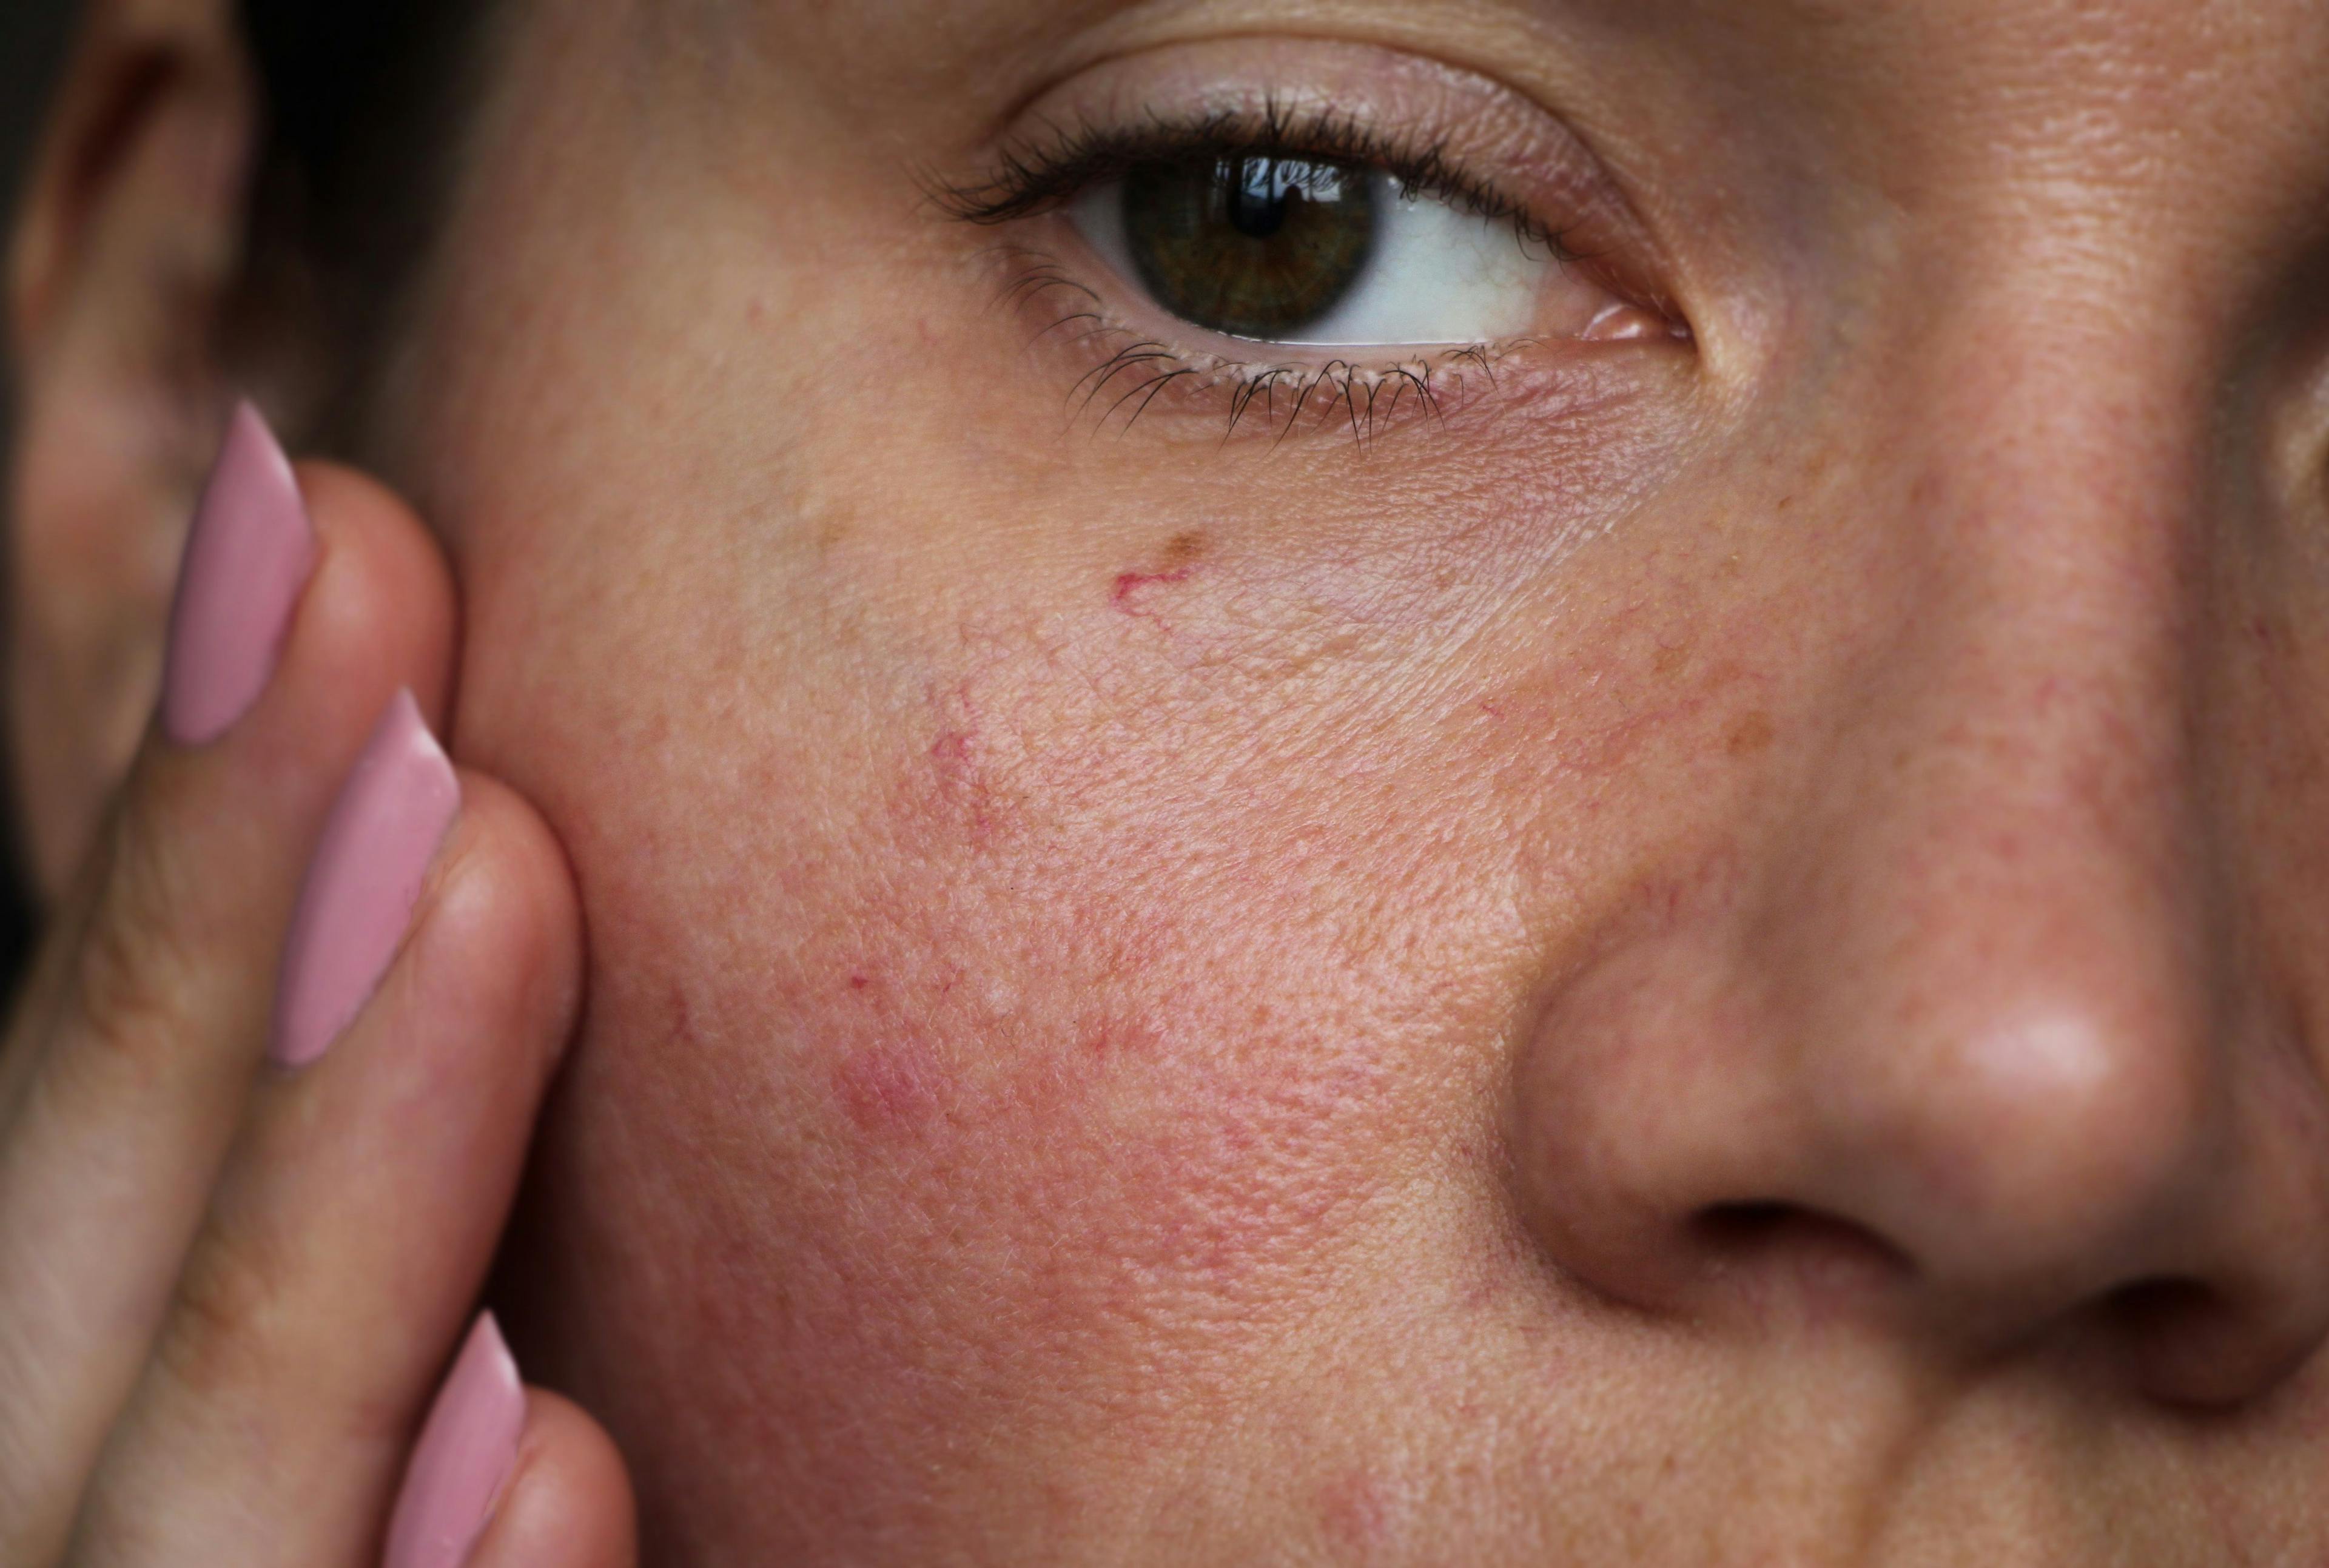 Girl with burst capillaries on face | Image Credit: © Angelina - stock.adobe.com.